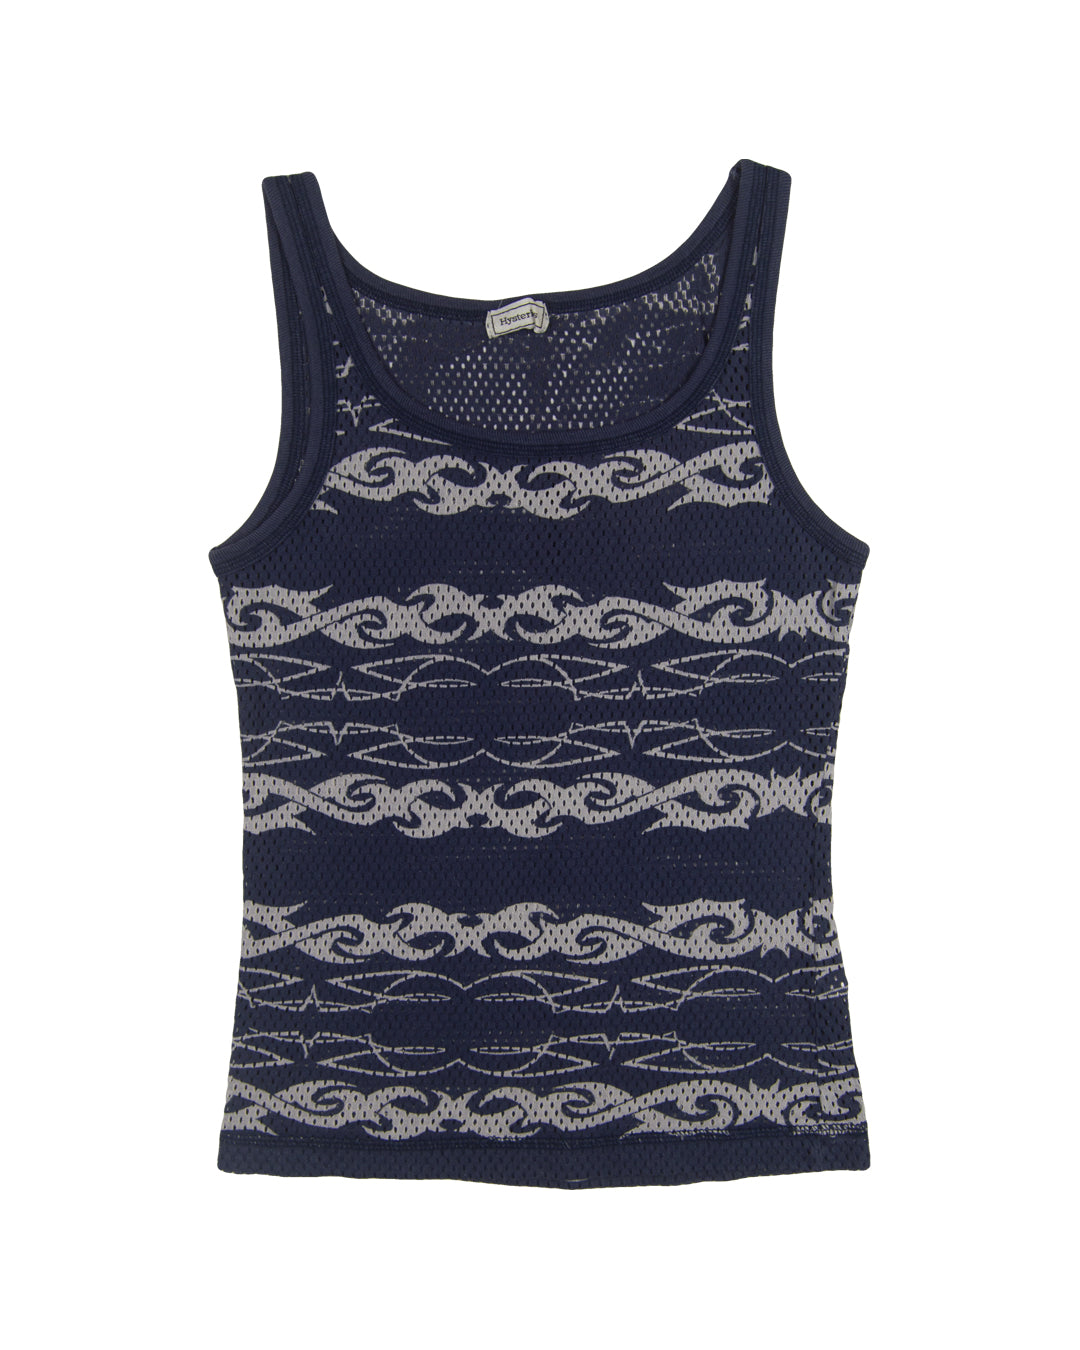 Hysteric Glamour Tribal Mesh Tank Top